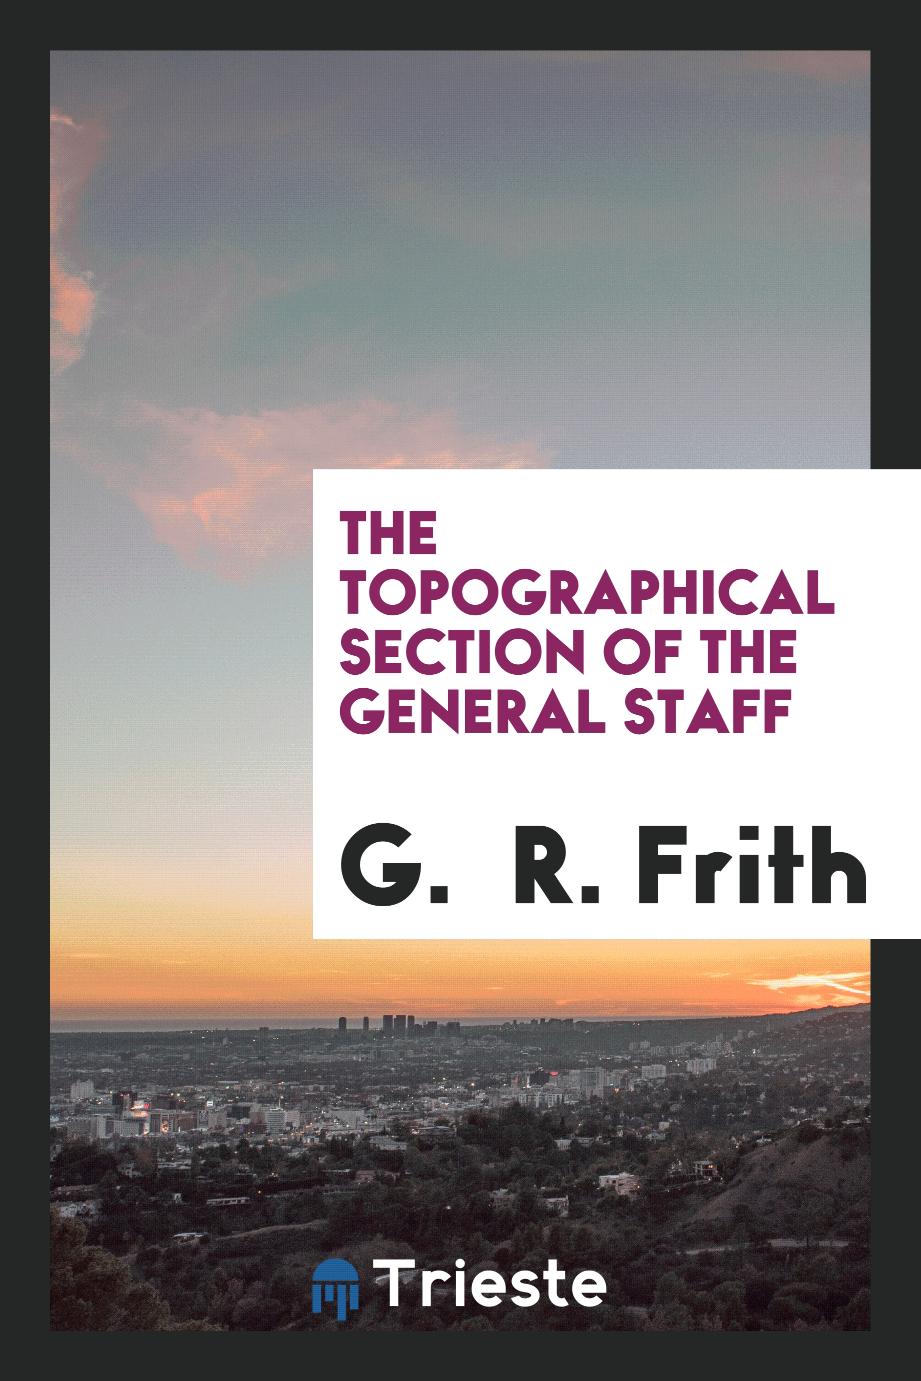 The Topographical Section of the General Staff